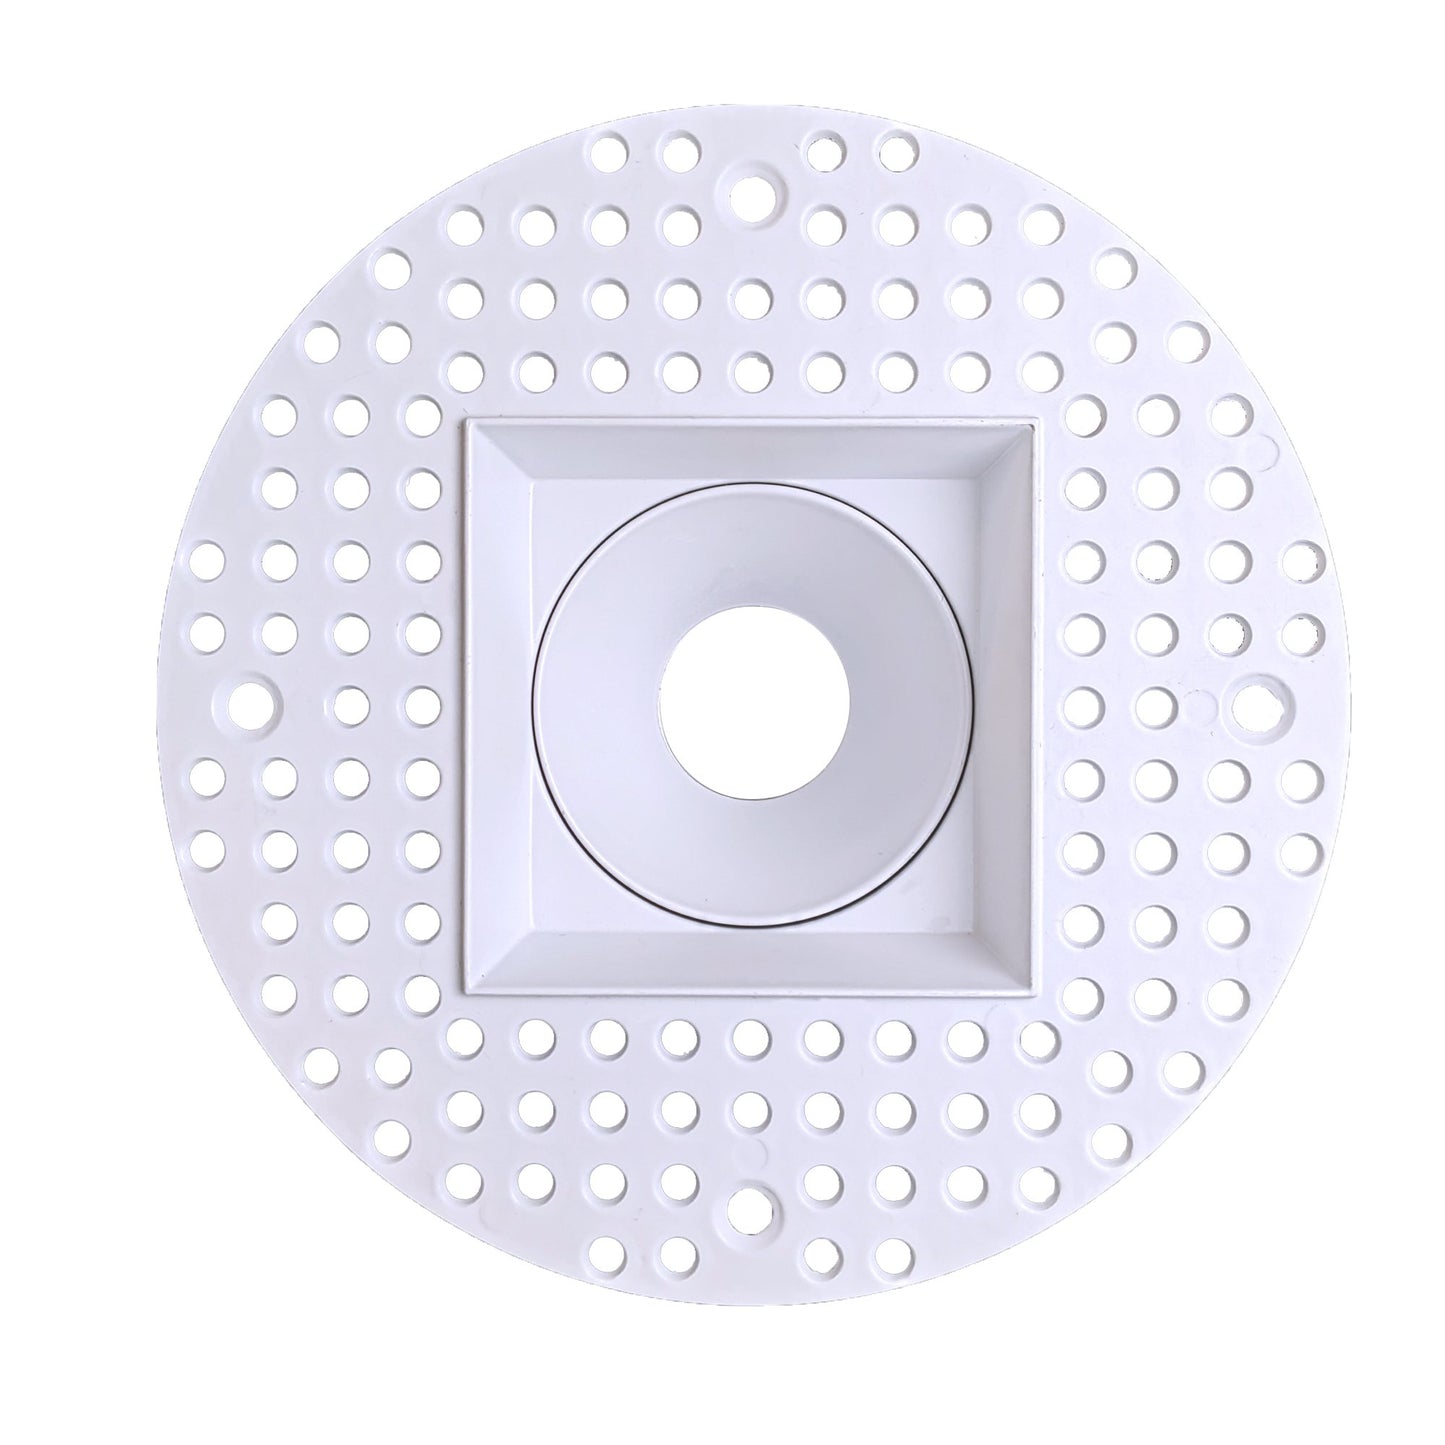 GDL-G10921Goodlite Changeable Trim for Aster 2" 8W/14W/20W Regress Luminaire Selectable CCT